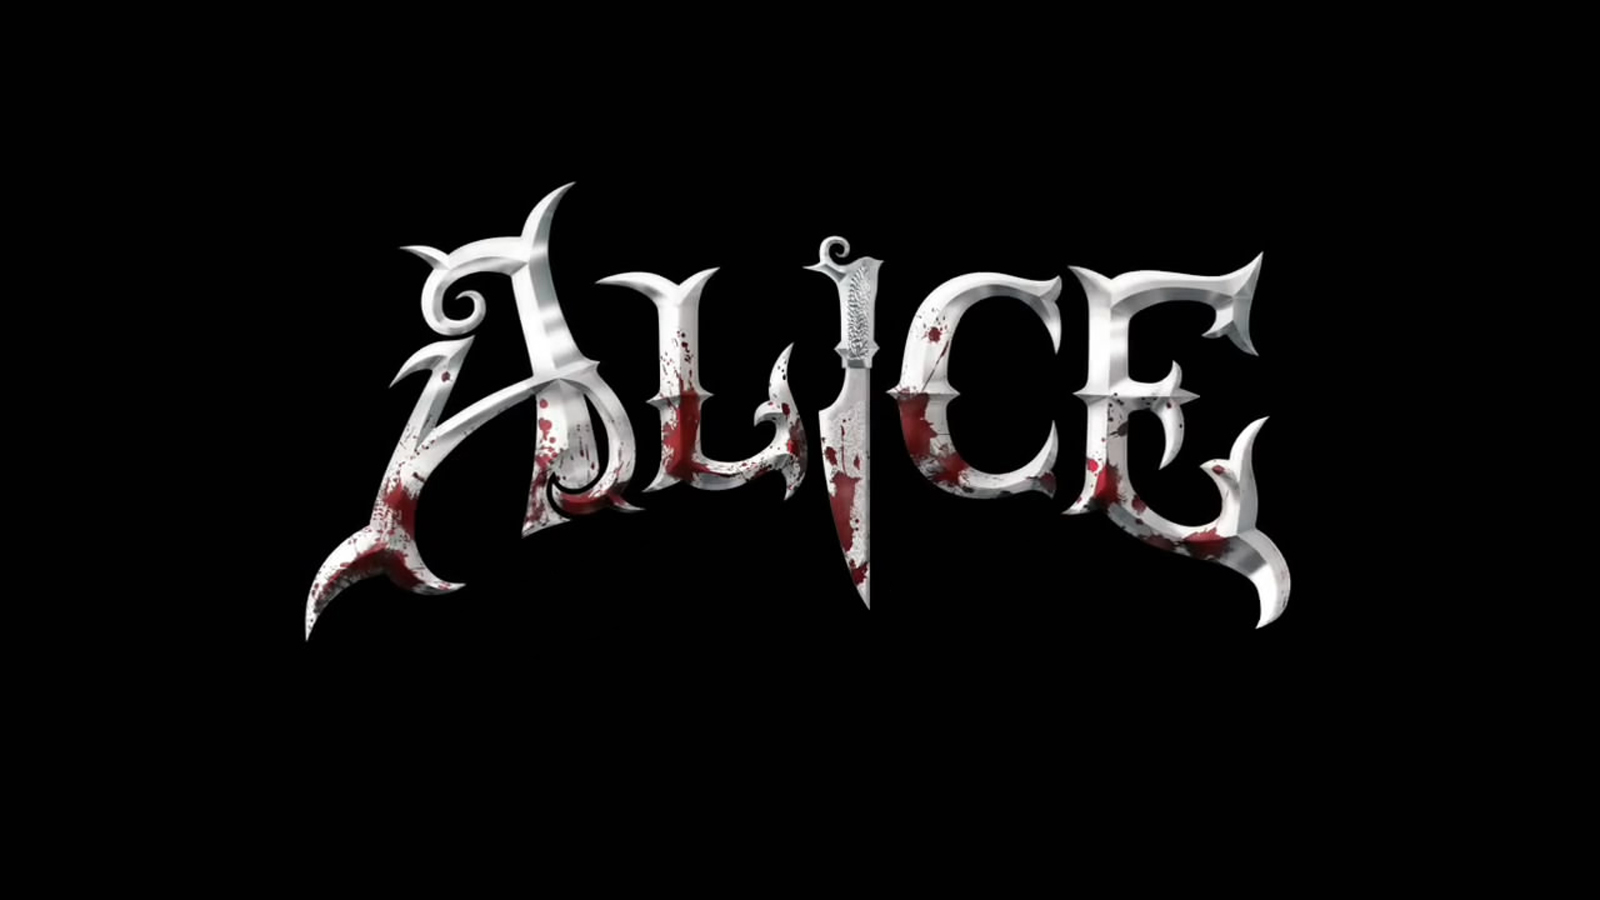 1920x1080 Background video game, alice: madness returns